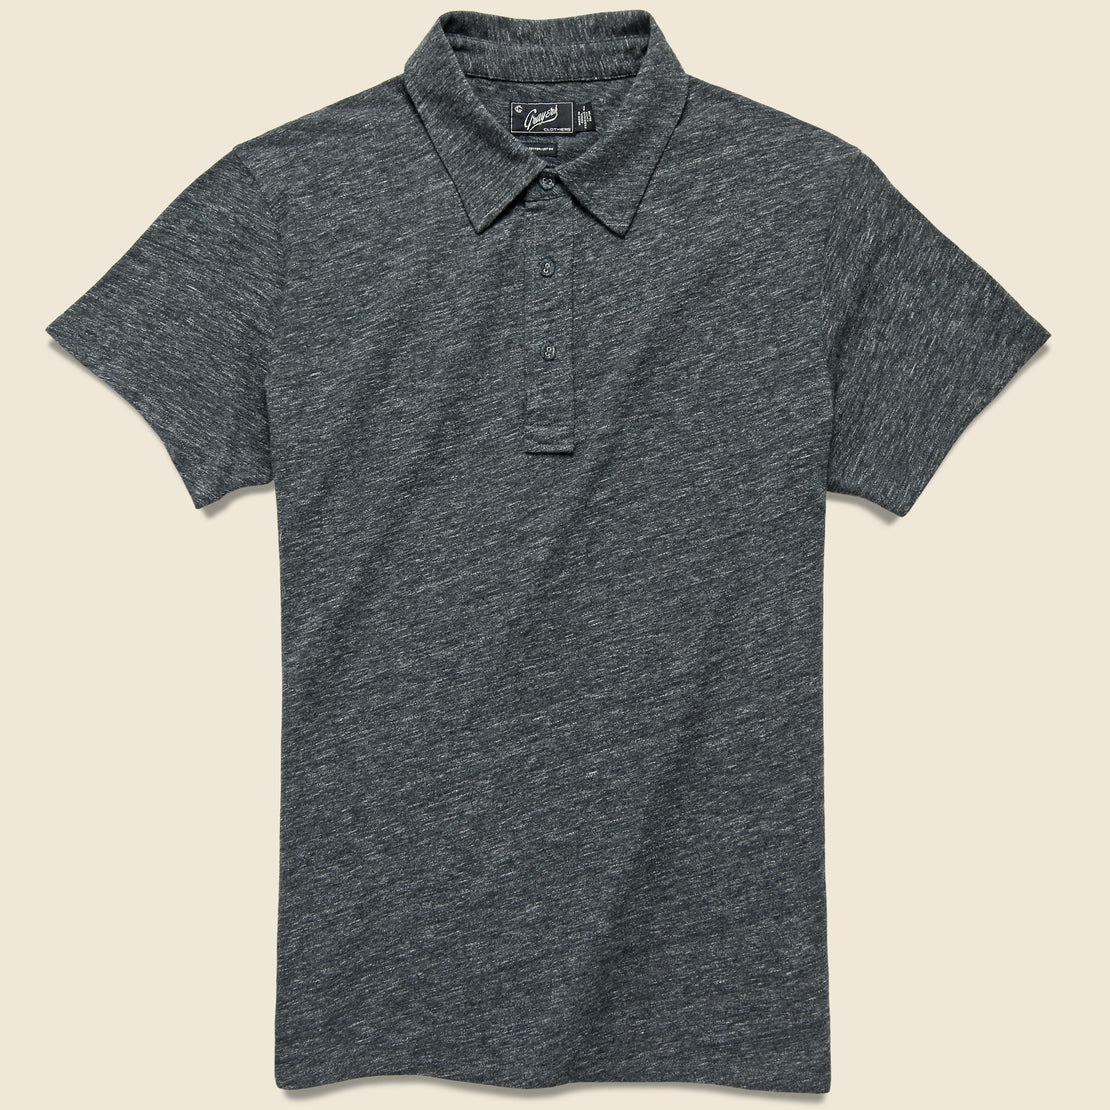 Grayers Hartford Nep Jersey Polo - Charcoal